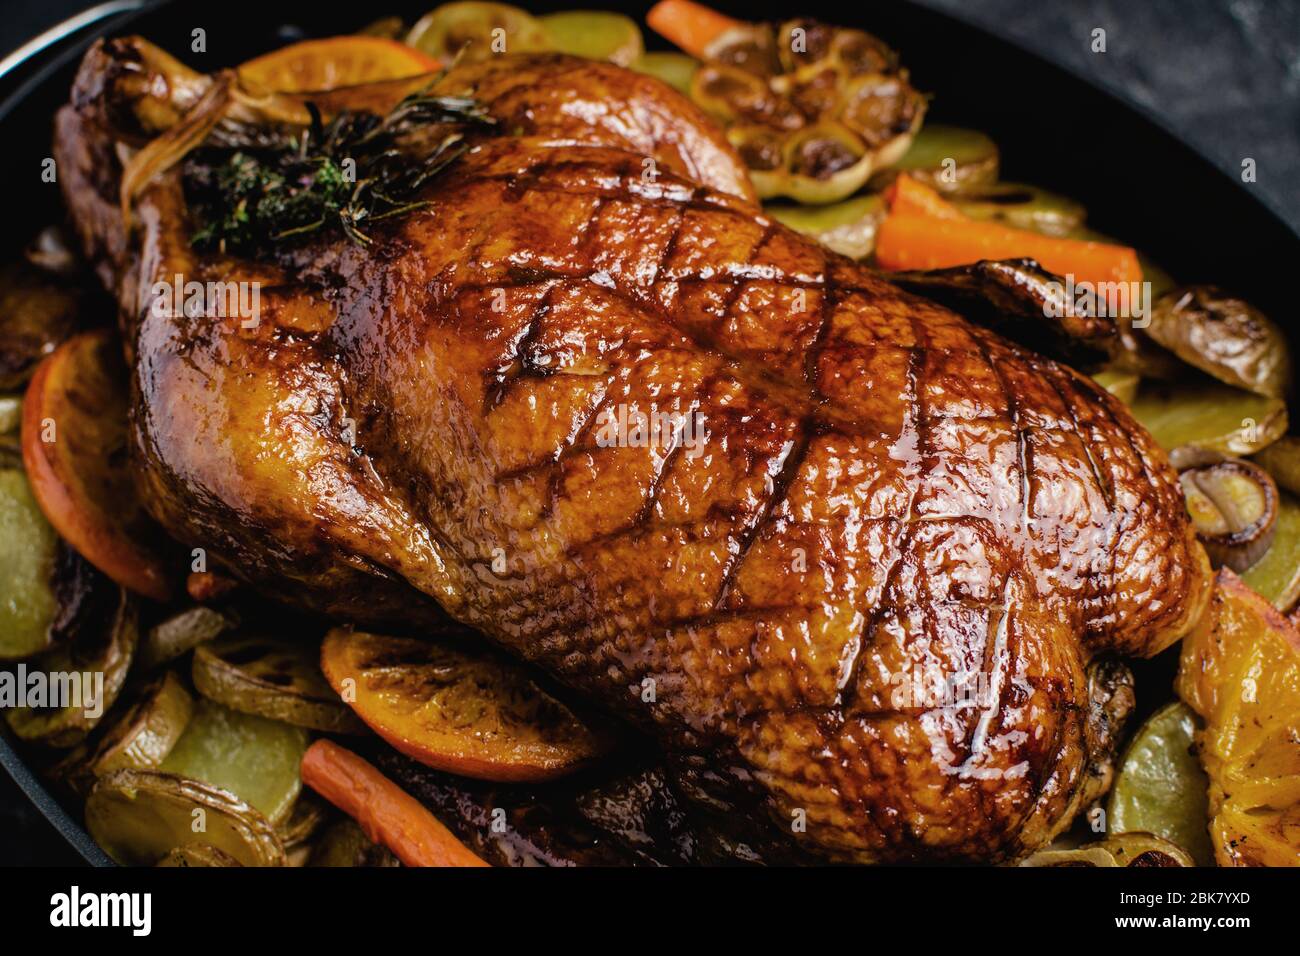 Whole Duck Roasted with Oranges, Carrots and Potatoes on Rustic Dark Stone Background Stock Photo